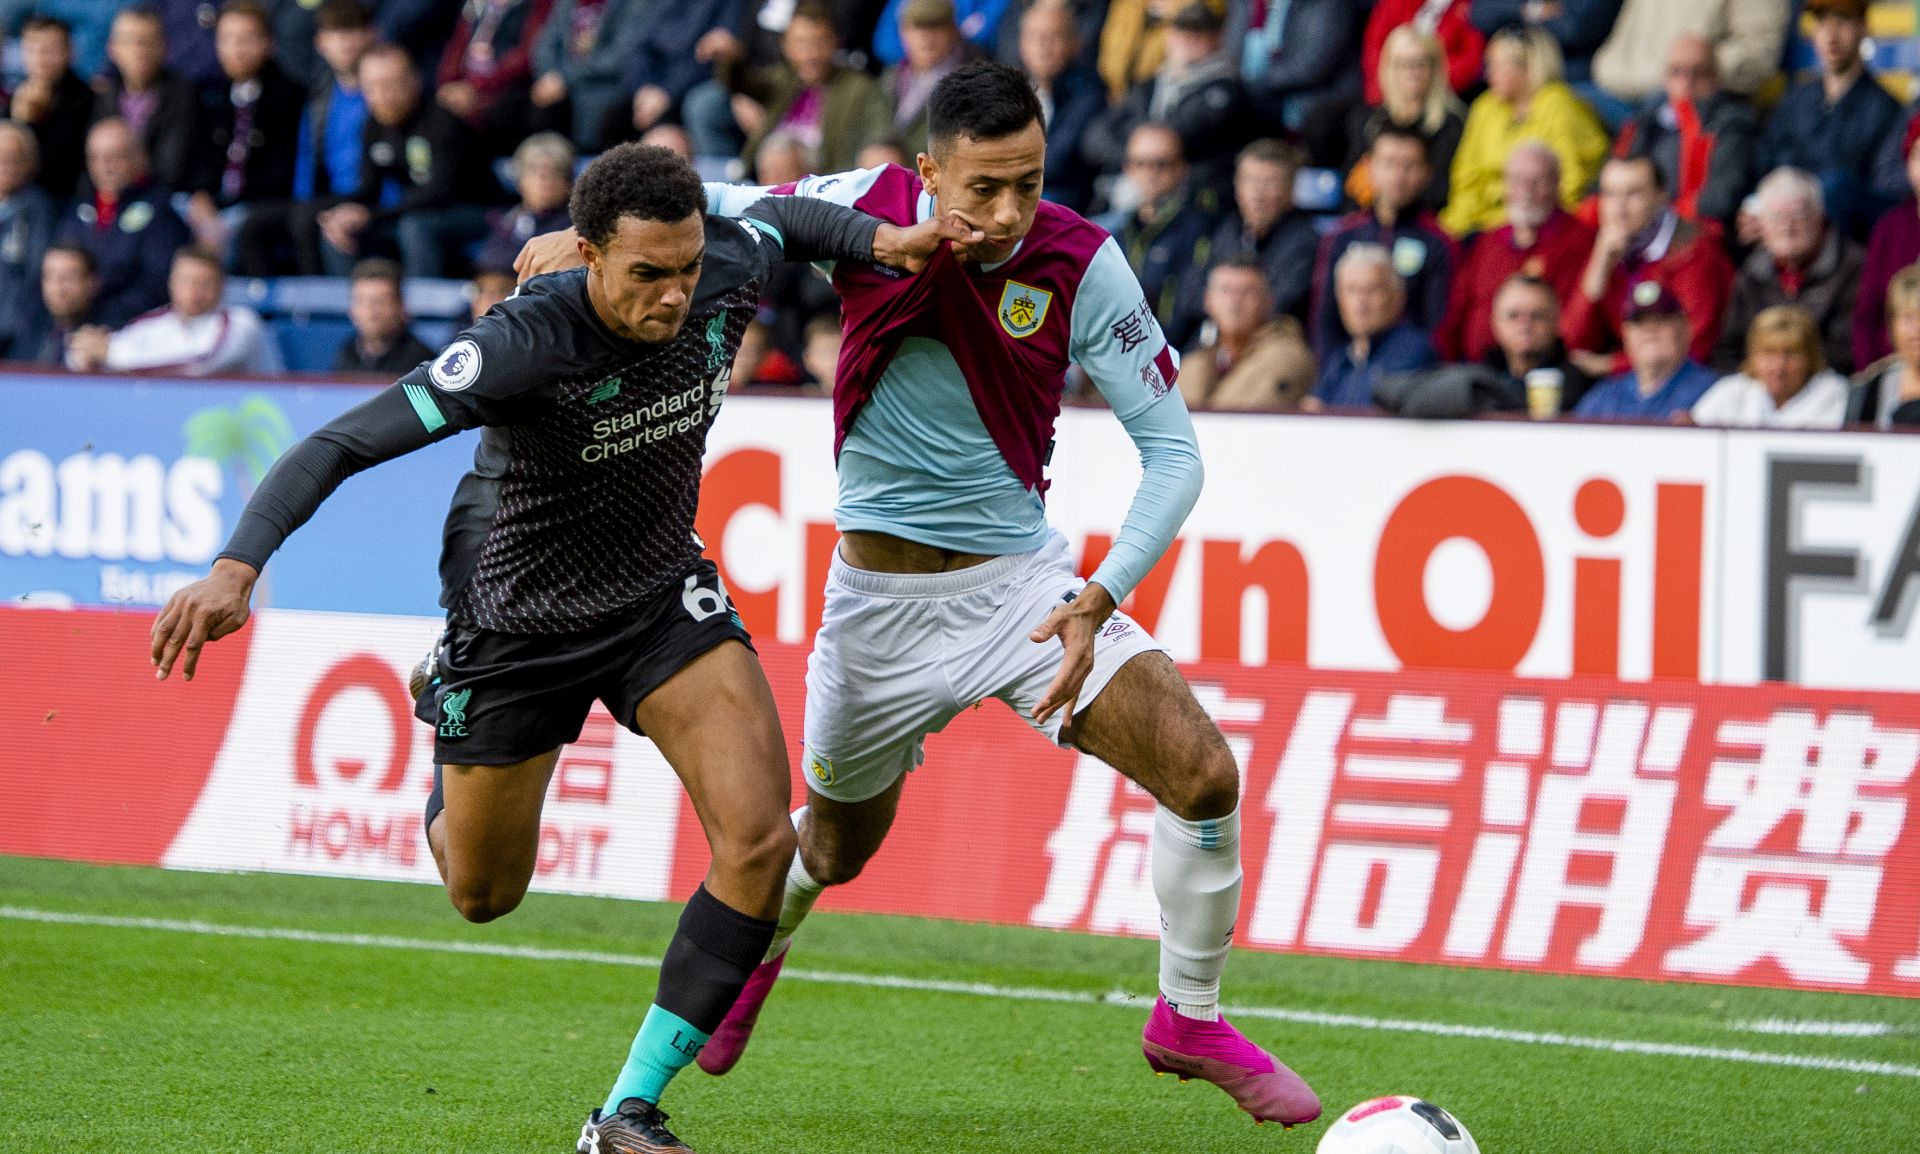 epa07808167 Liverpool's Trent Alexander-Arnold (L) in action with Burnley's Dwight McNeil (R) during the English Premier League soccer match between Burnley and Liverpool held at the Turf Moor in Burnley, Britain, 31 August 2019.  EPA/PETER POWELL EDITORIAL USE ONLY. No use with unauthorized audio, video, data, fixture lists, club/league logos or 'live' services. Online in-match use limited to 120 images, no video emulation. No use in betting, games or single club/league/player publications